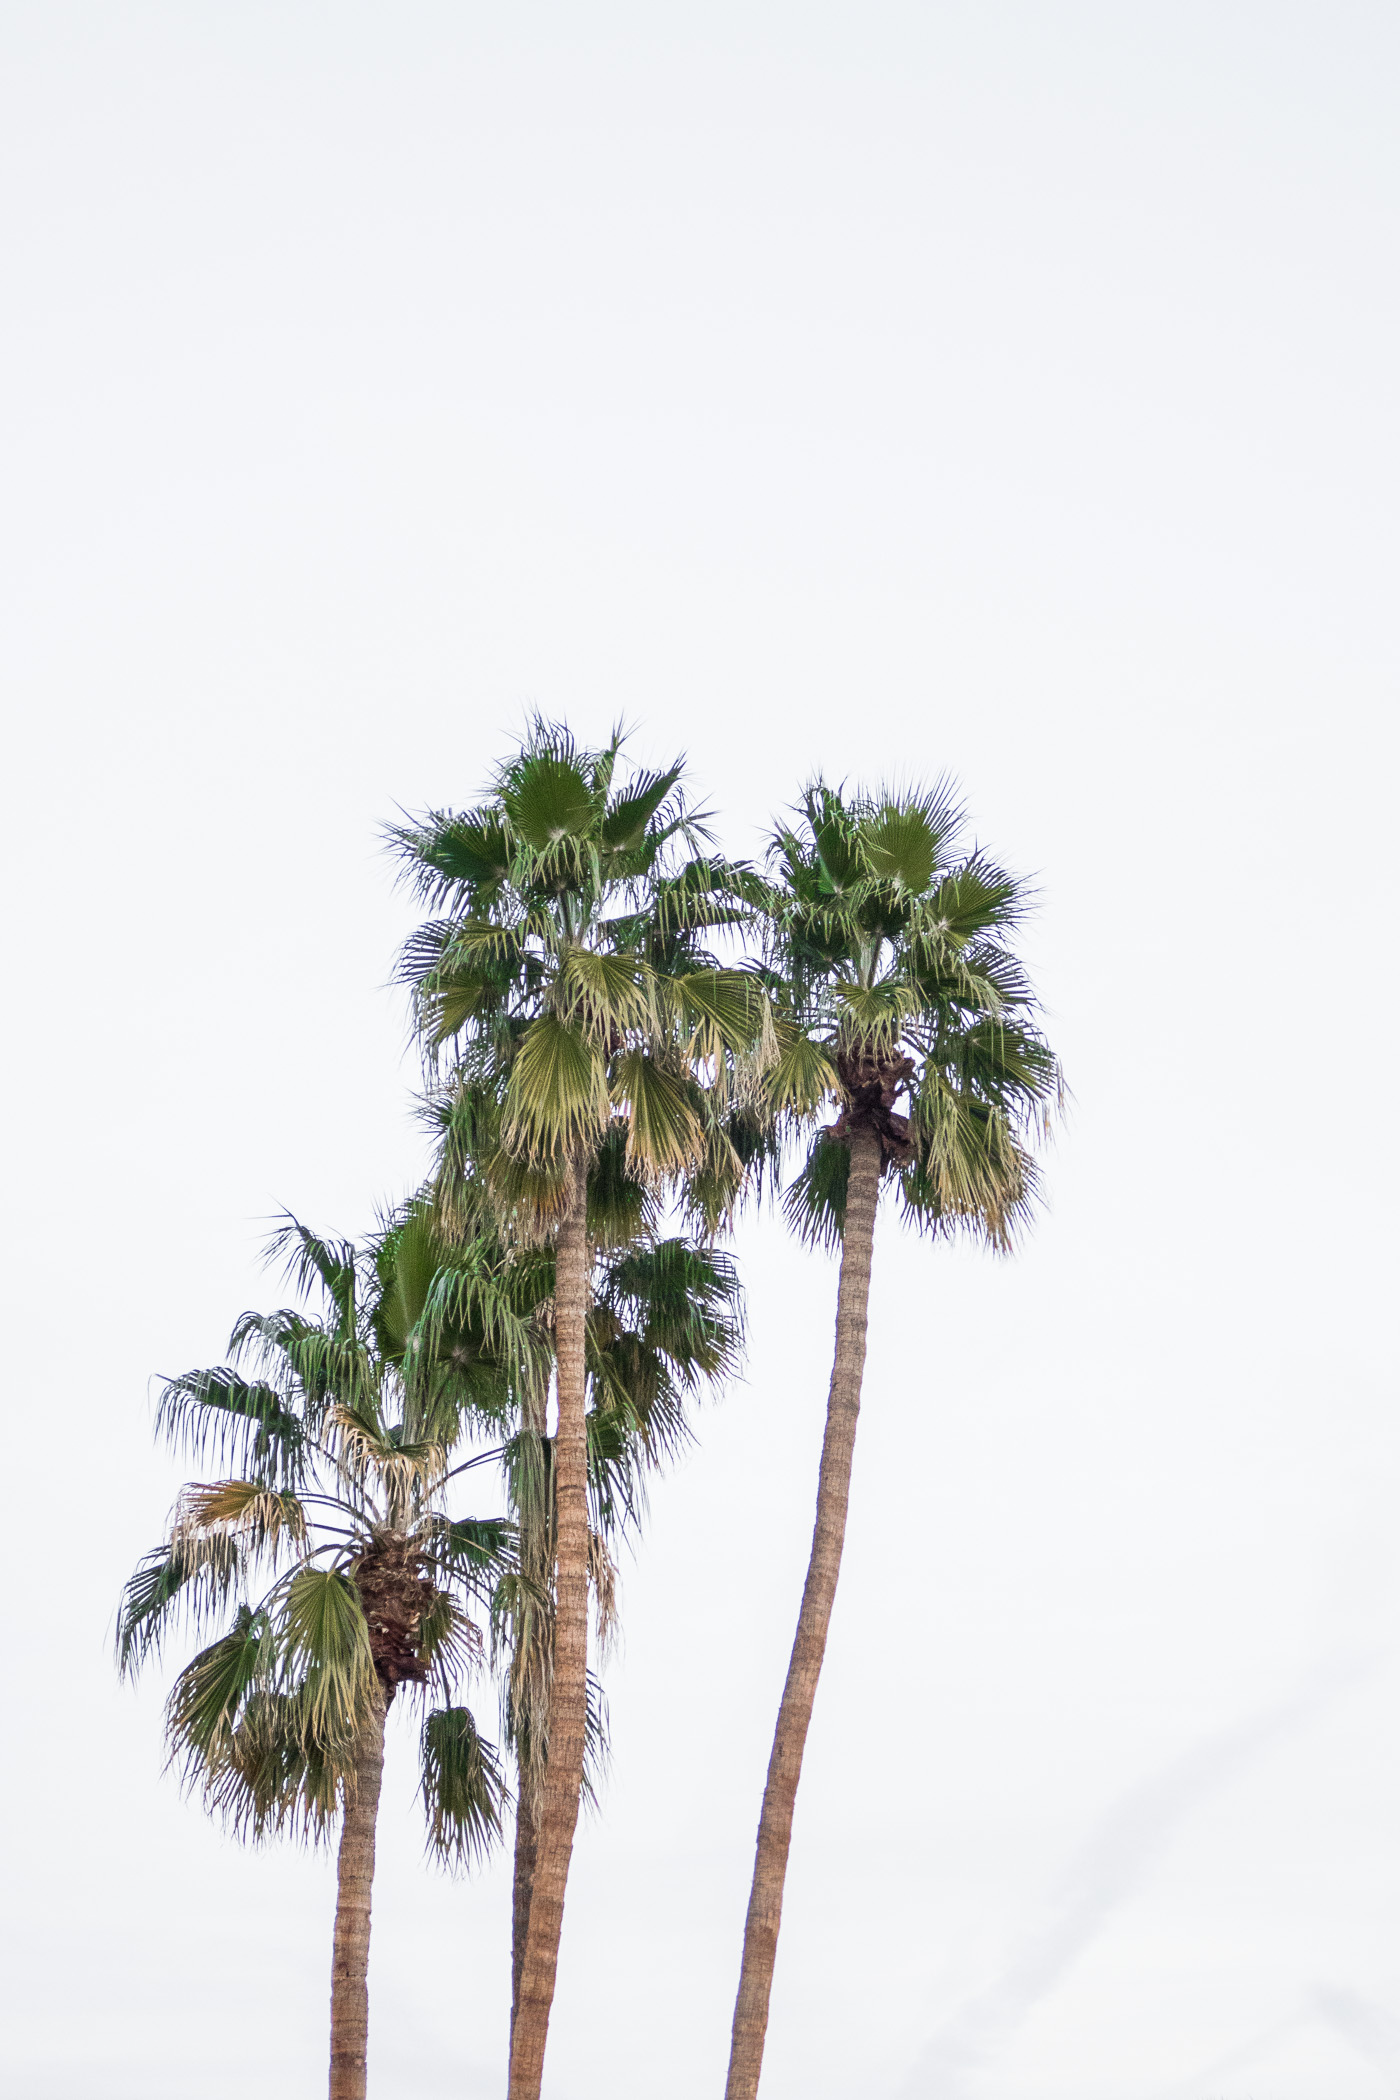 Palm trees in Palm Springs, California